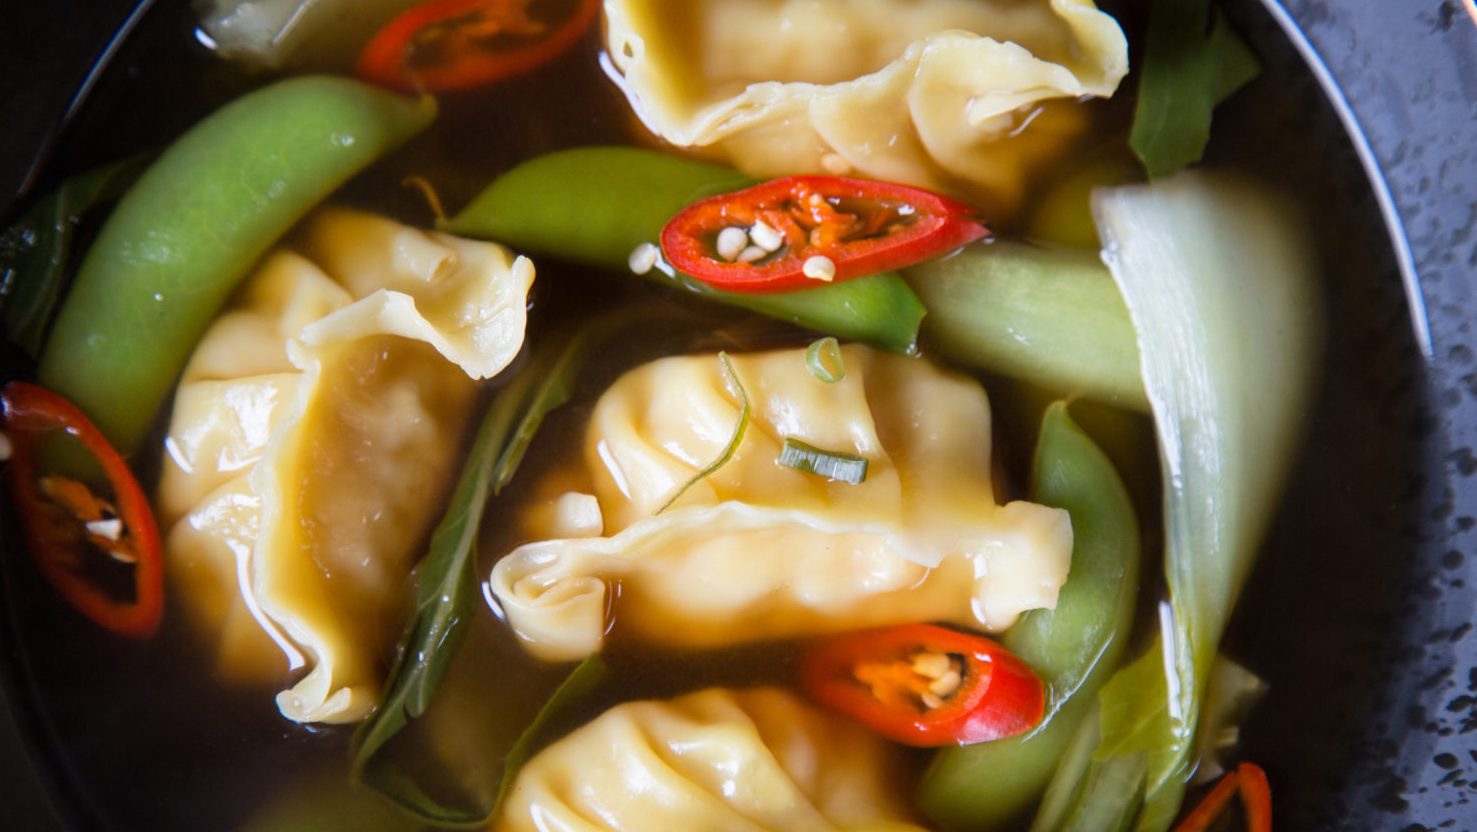 Four dumplings, spring onions and chilli in brown clear soup